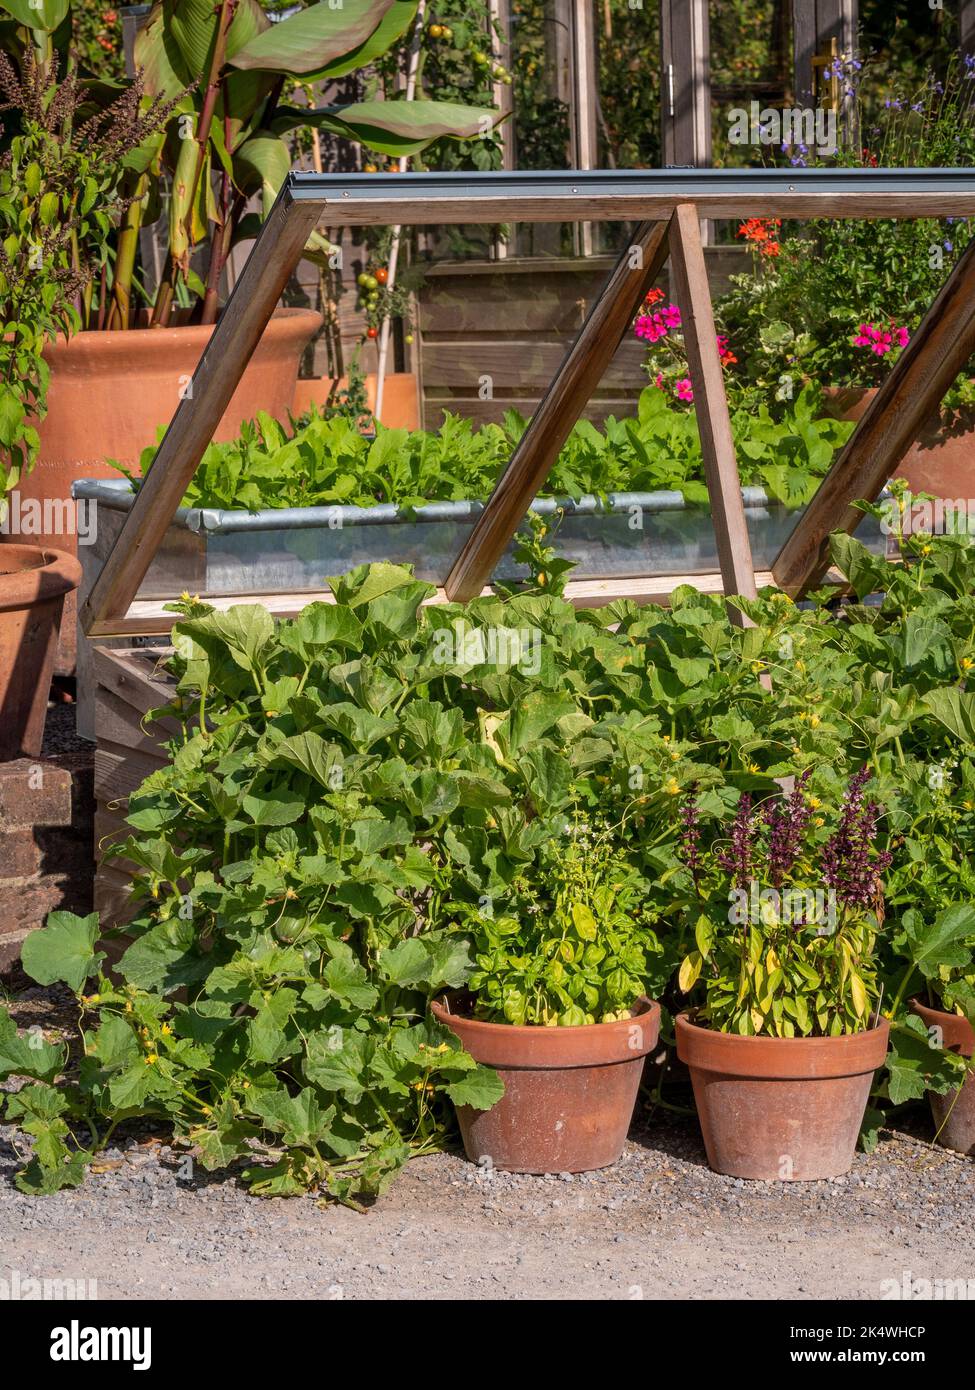 Terracotta pots planted with basil in front of a wooden cold frame containing squashes, with a galvanised trough of salad leaves behind. UK Stock Photo